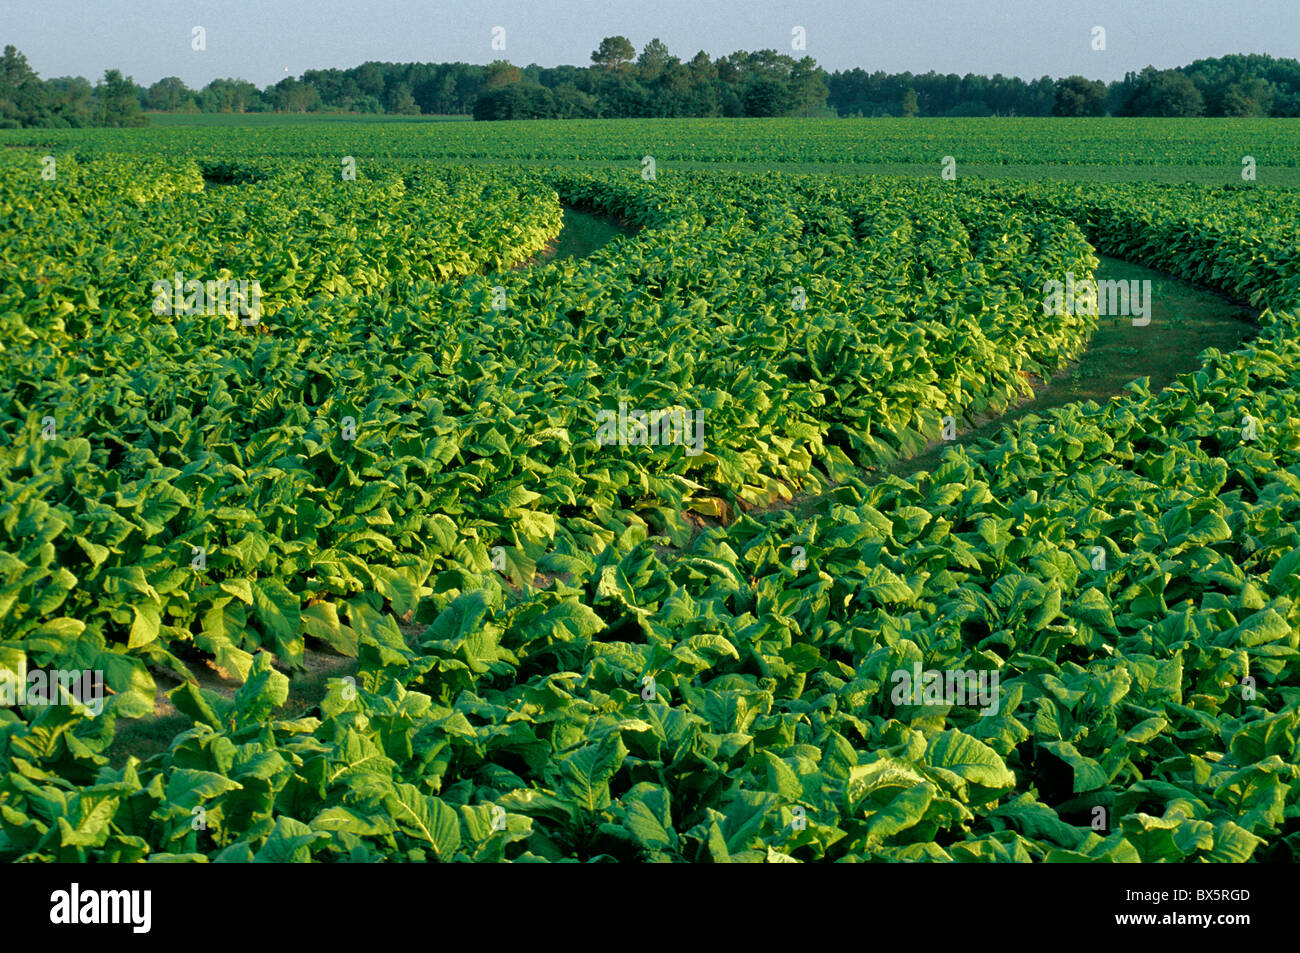 Tobacco 'NC71' field, sled roads, first morning light, Stock Photo